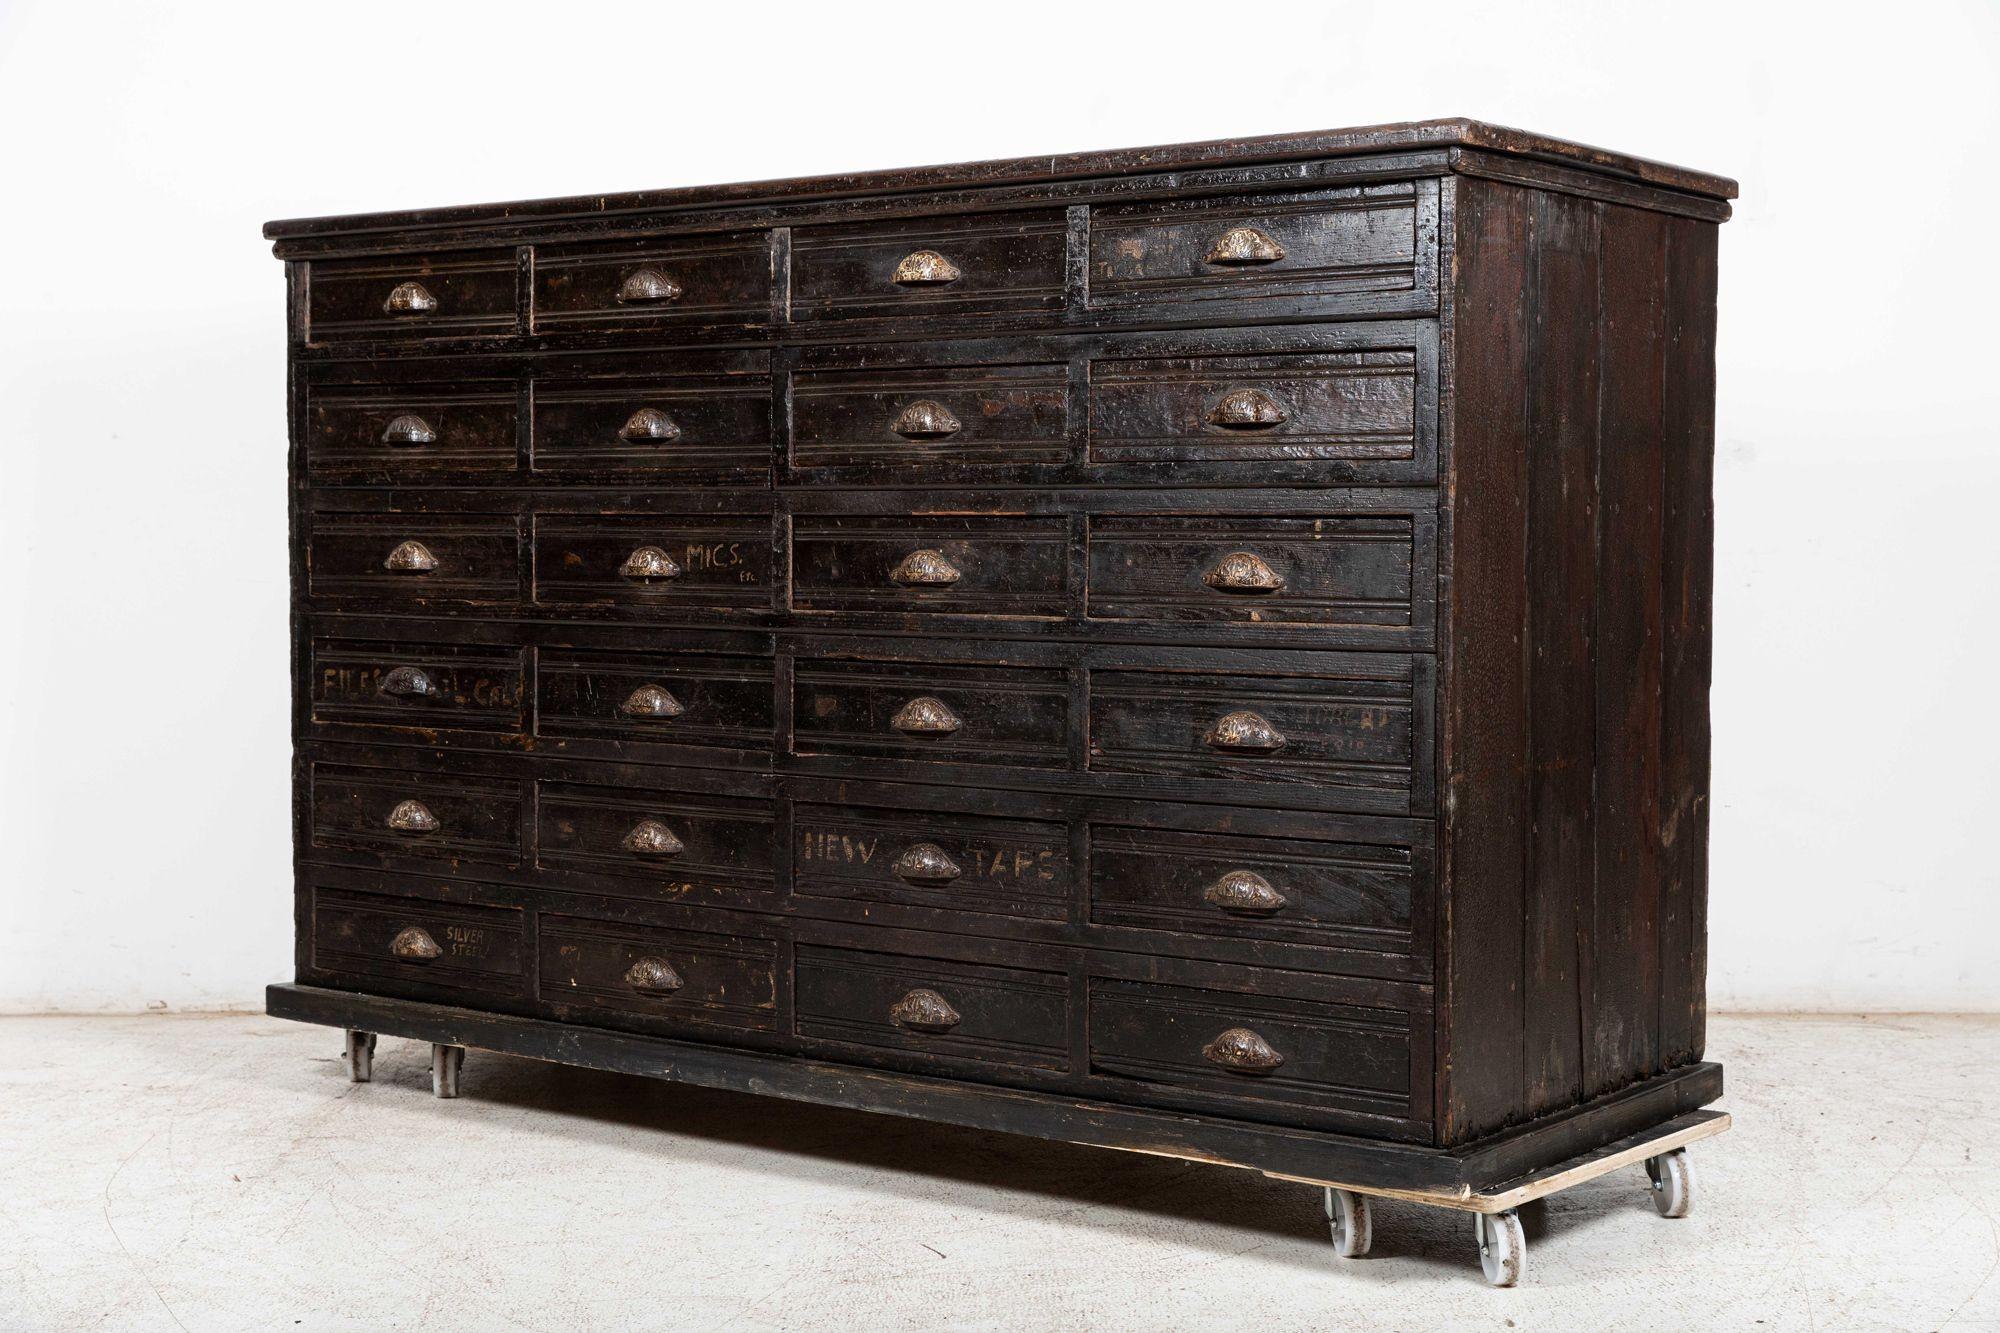 Circa 1890
 
Large 19th C English Engineers ebonised bank of 24 pine drawers.
 
Original hardware and finish.
 
Measures: W 189 x D 68 x H 112 cm.

 